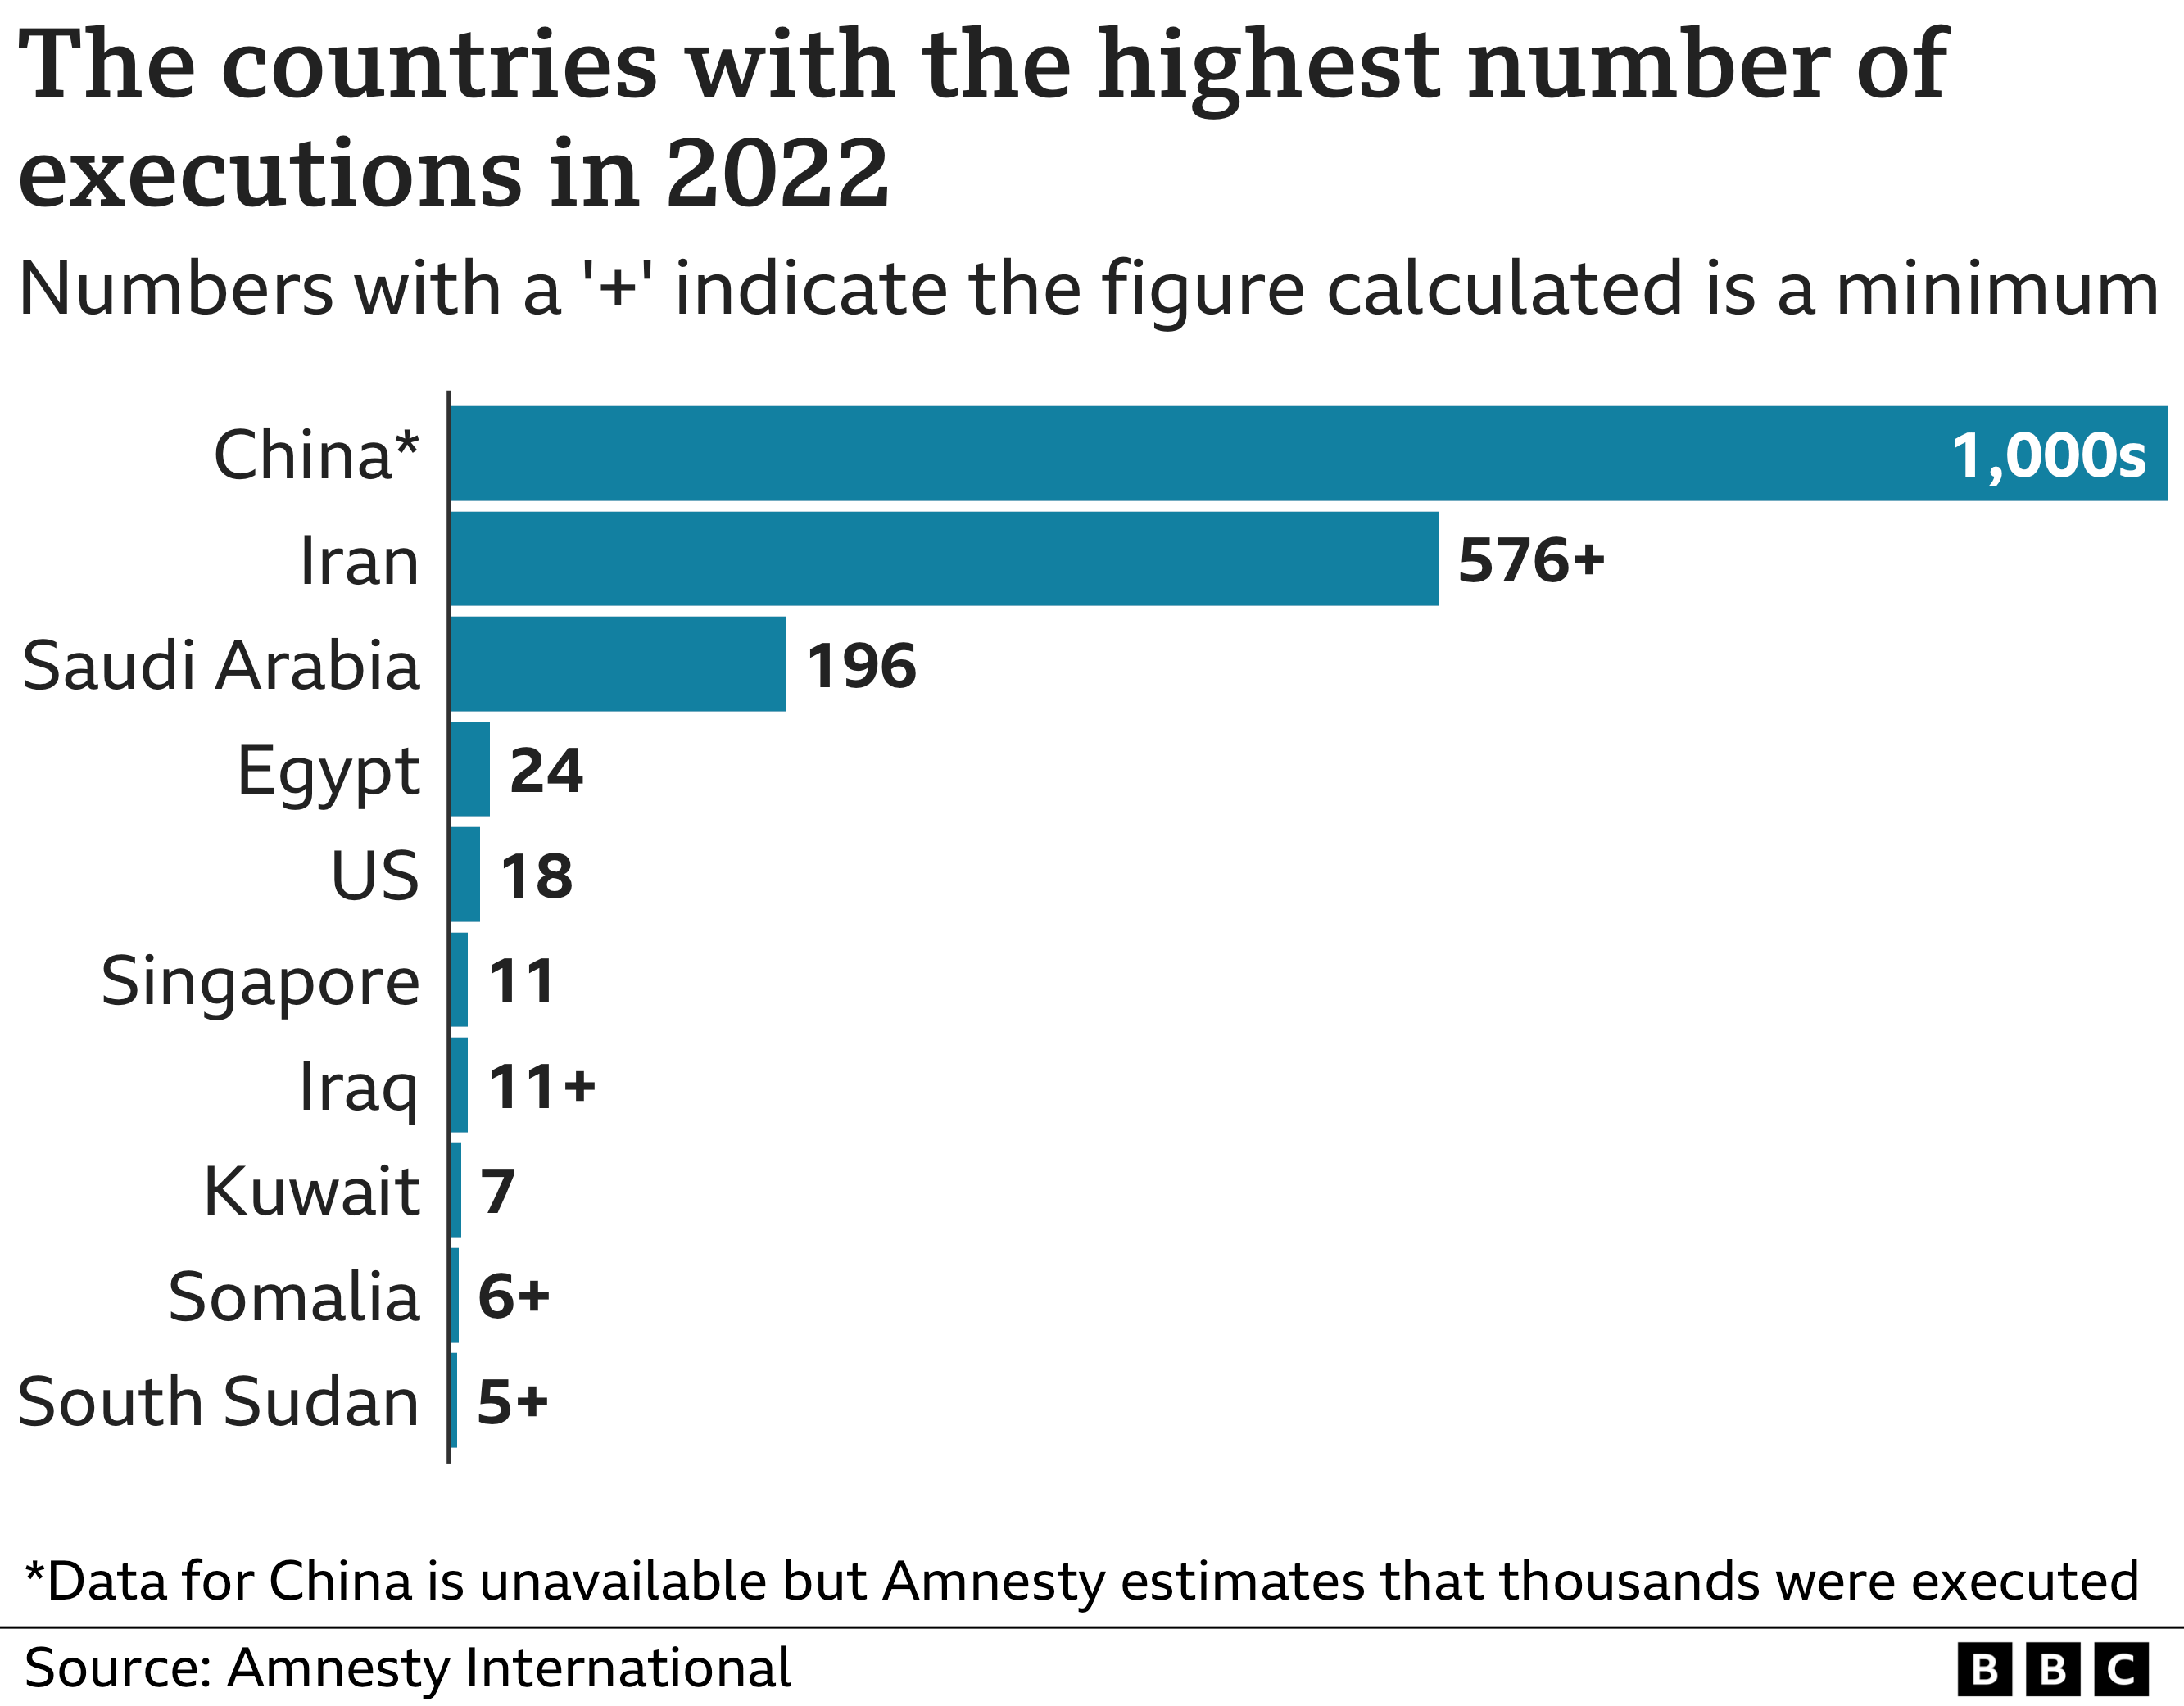 The countries with the highest number of executions in 2022